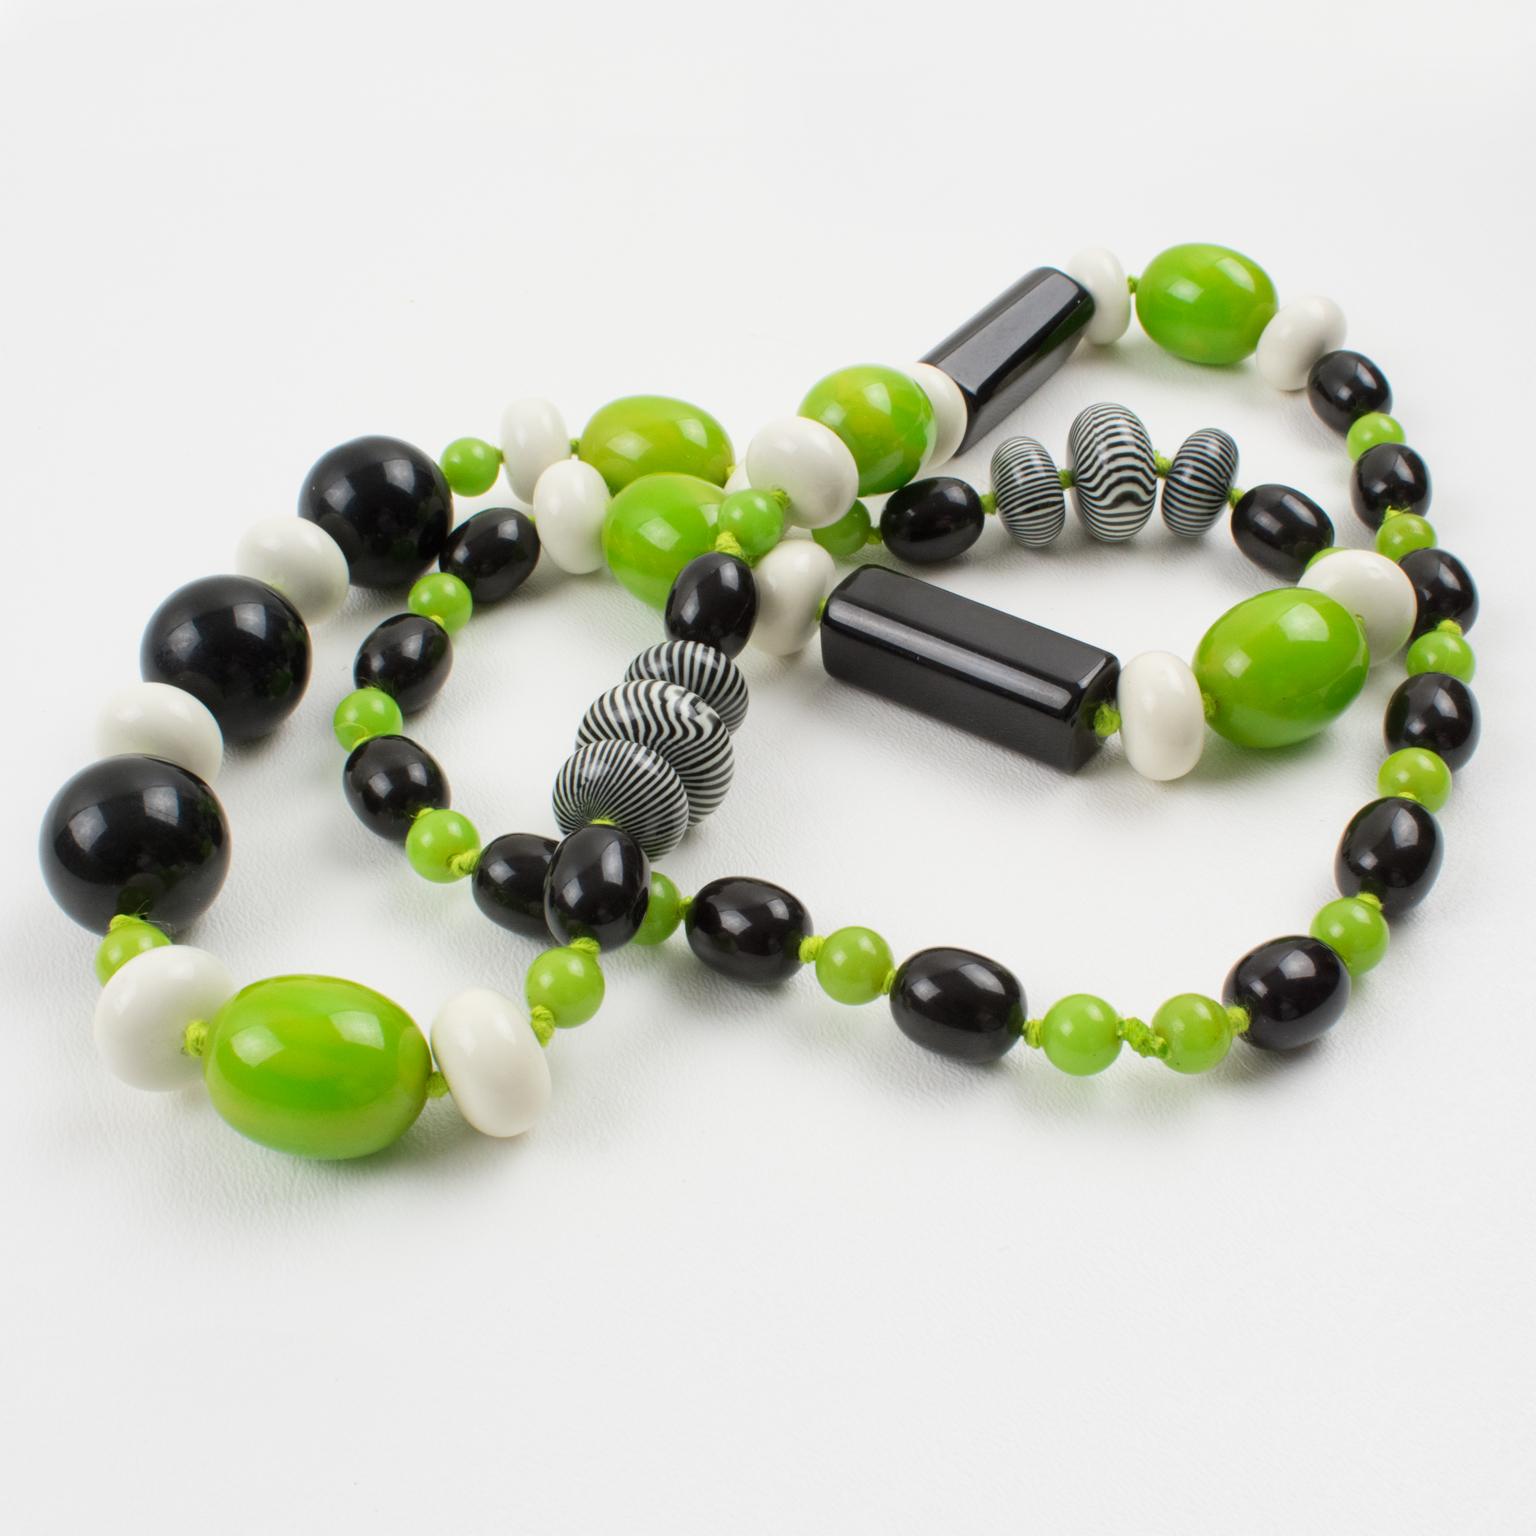 Bakelite and Lucite Necklace Extra Long Shape Black, White and Apple Green Beads 1